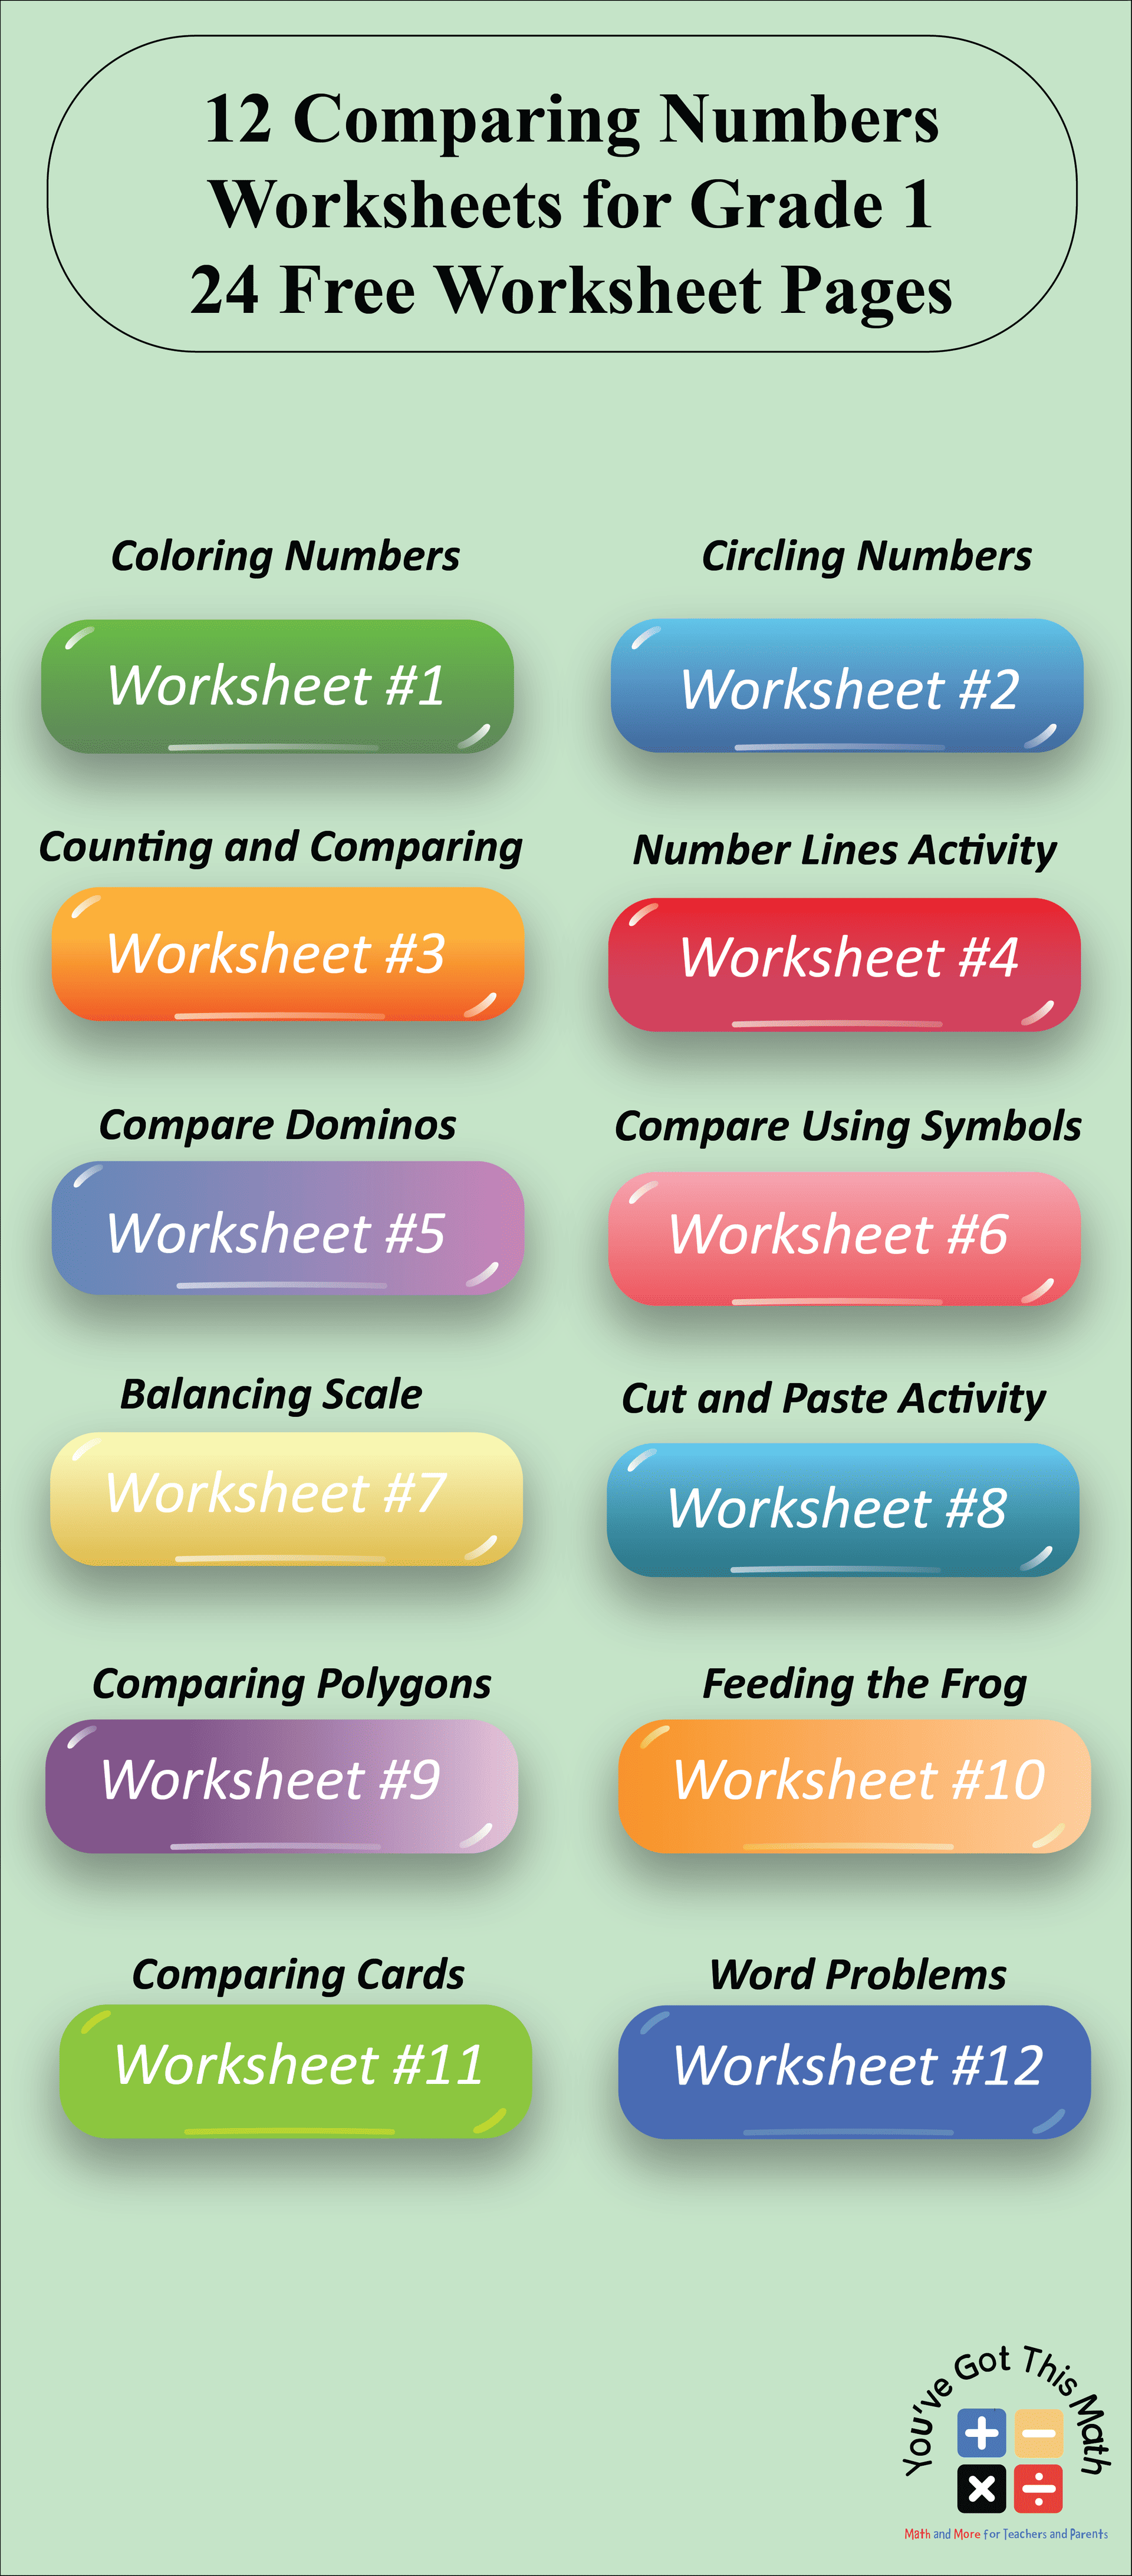 12 Comparing Numbers Worksheets for Grade 1-01